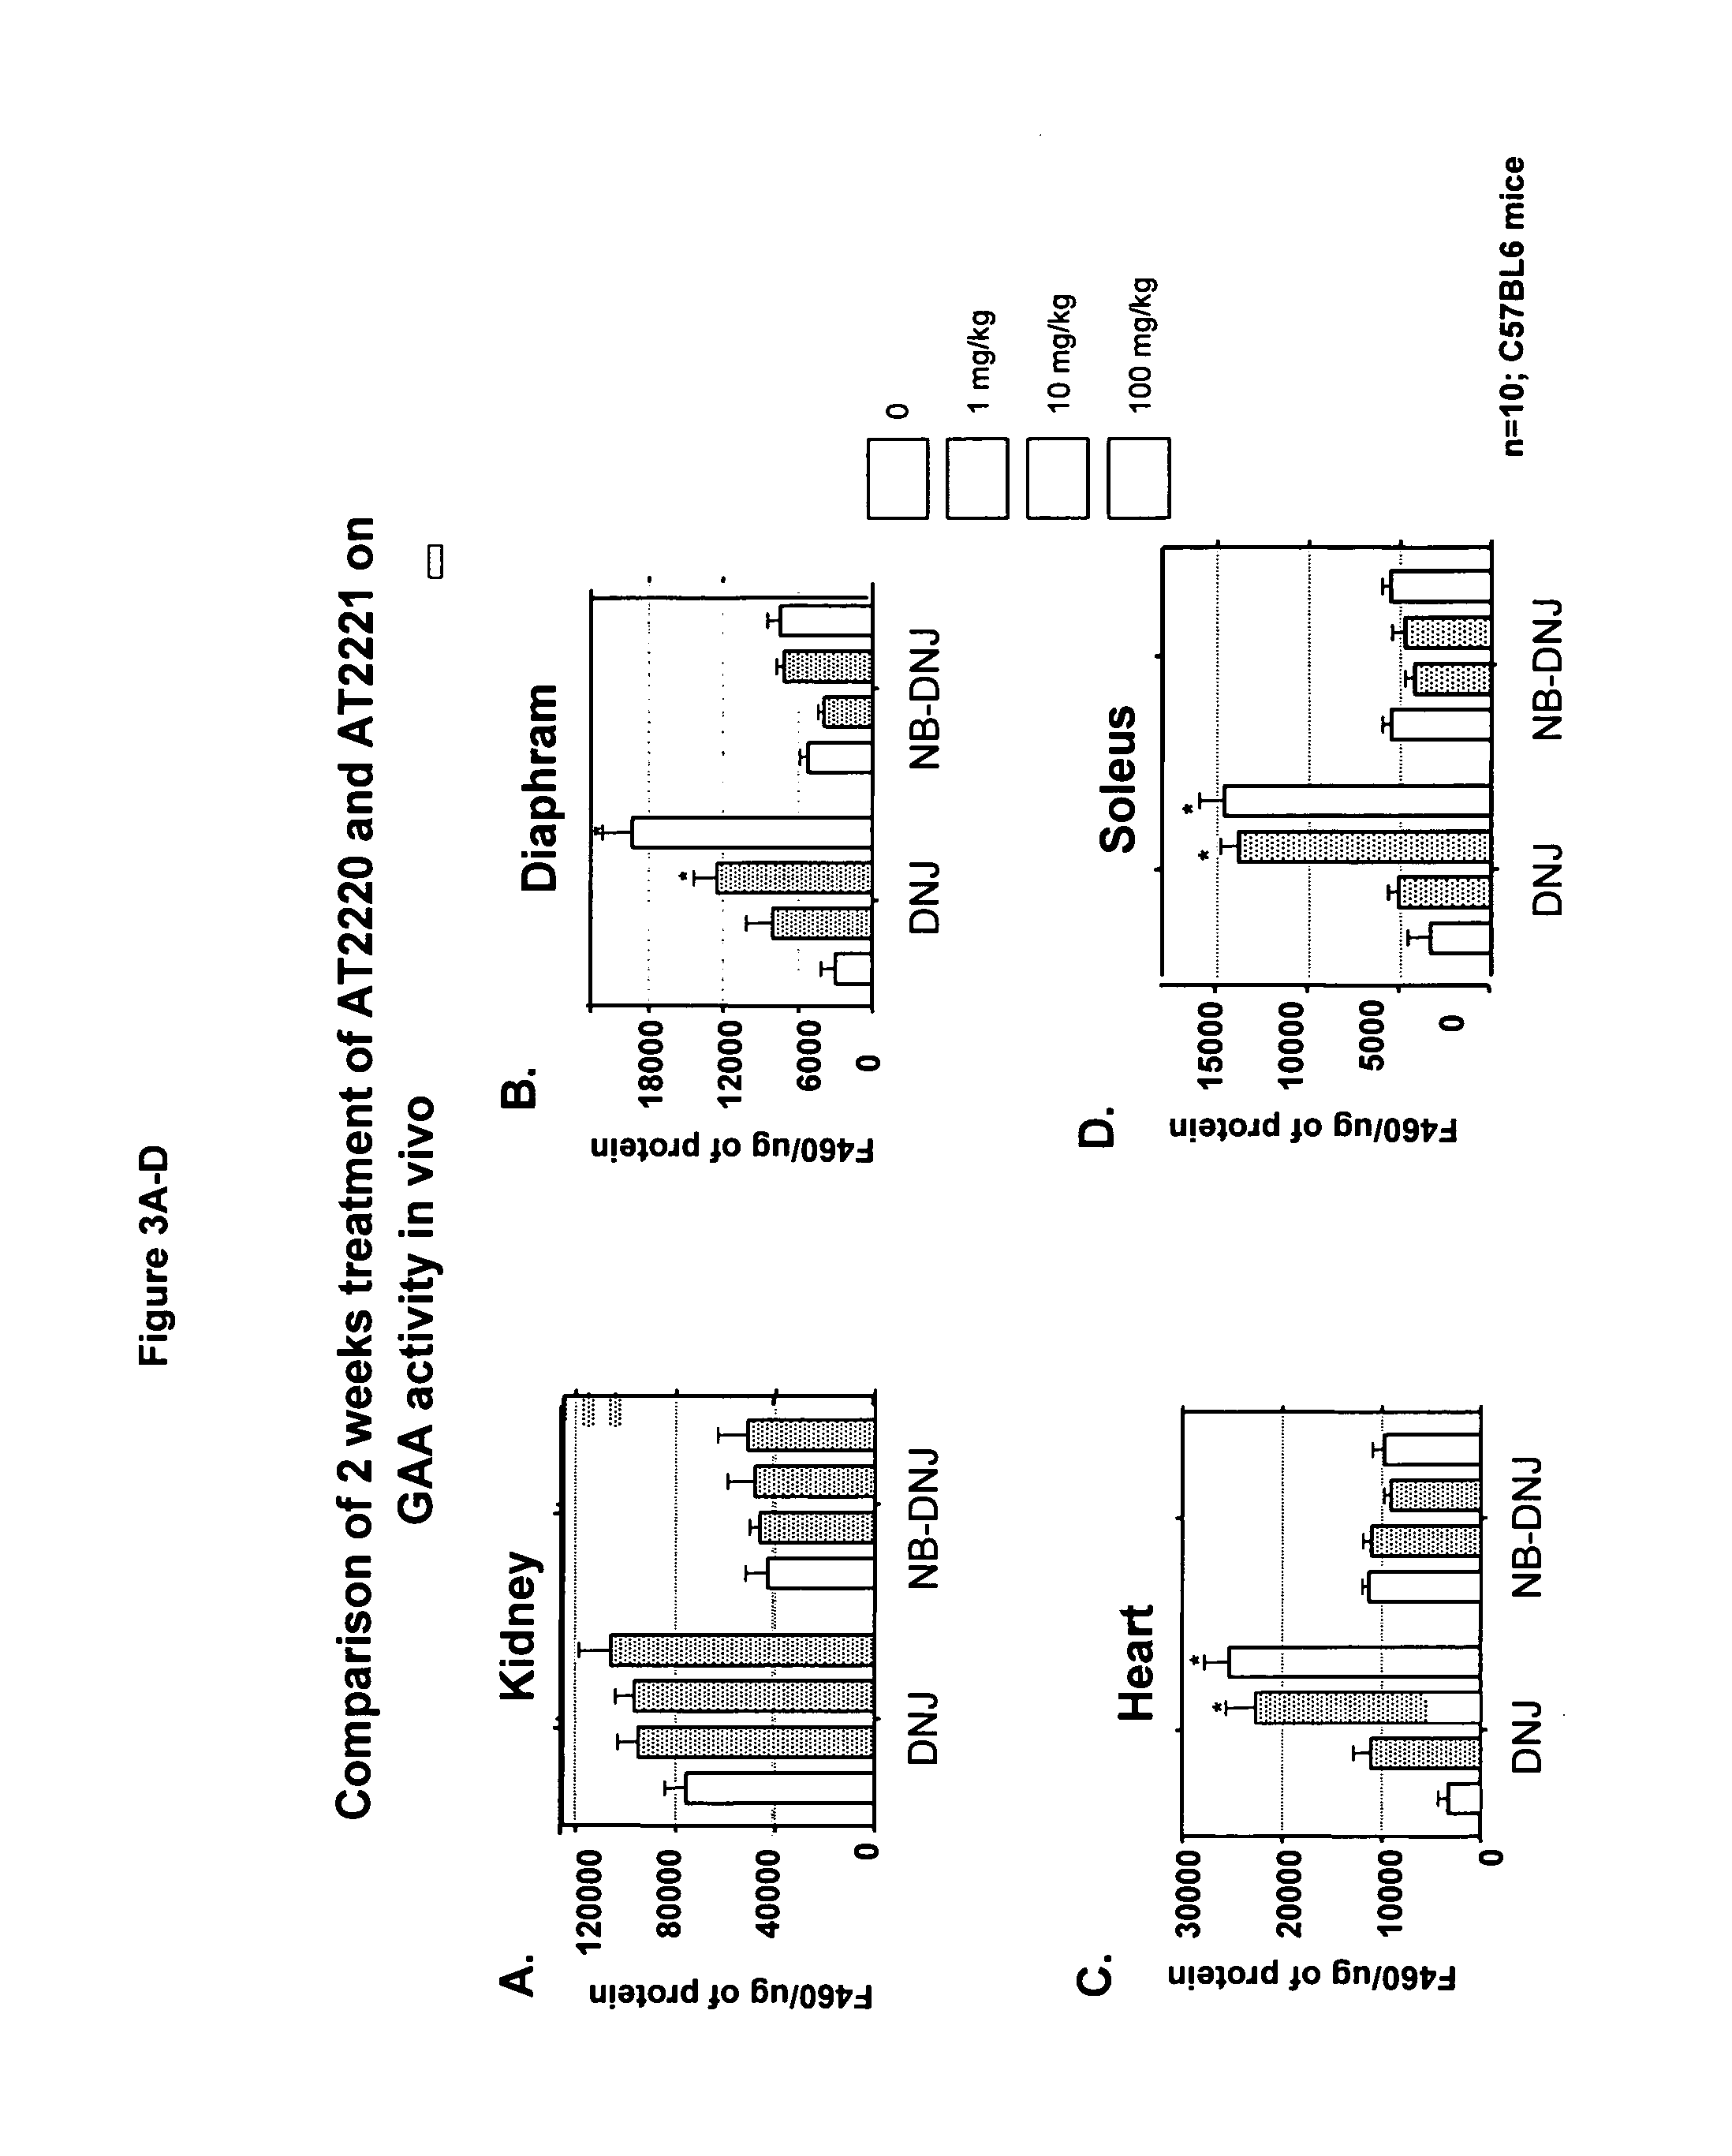 Method for the treatment of pompe disease using 1-deoxynojirimycin and derivatives